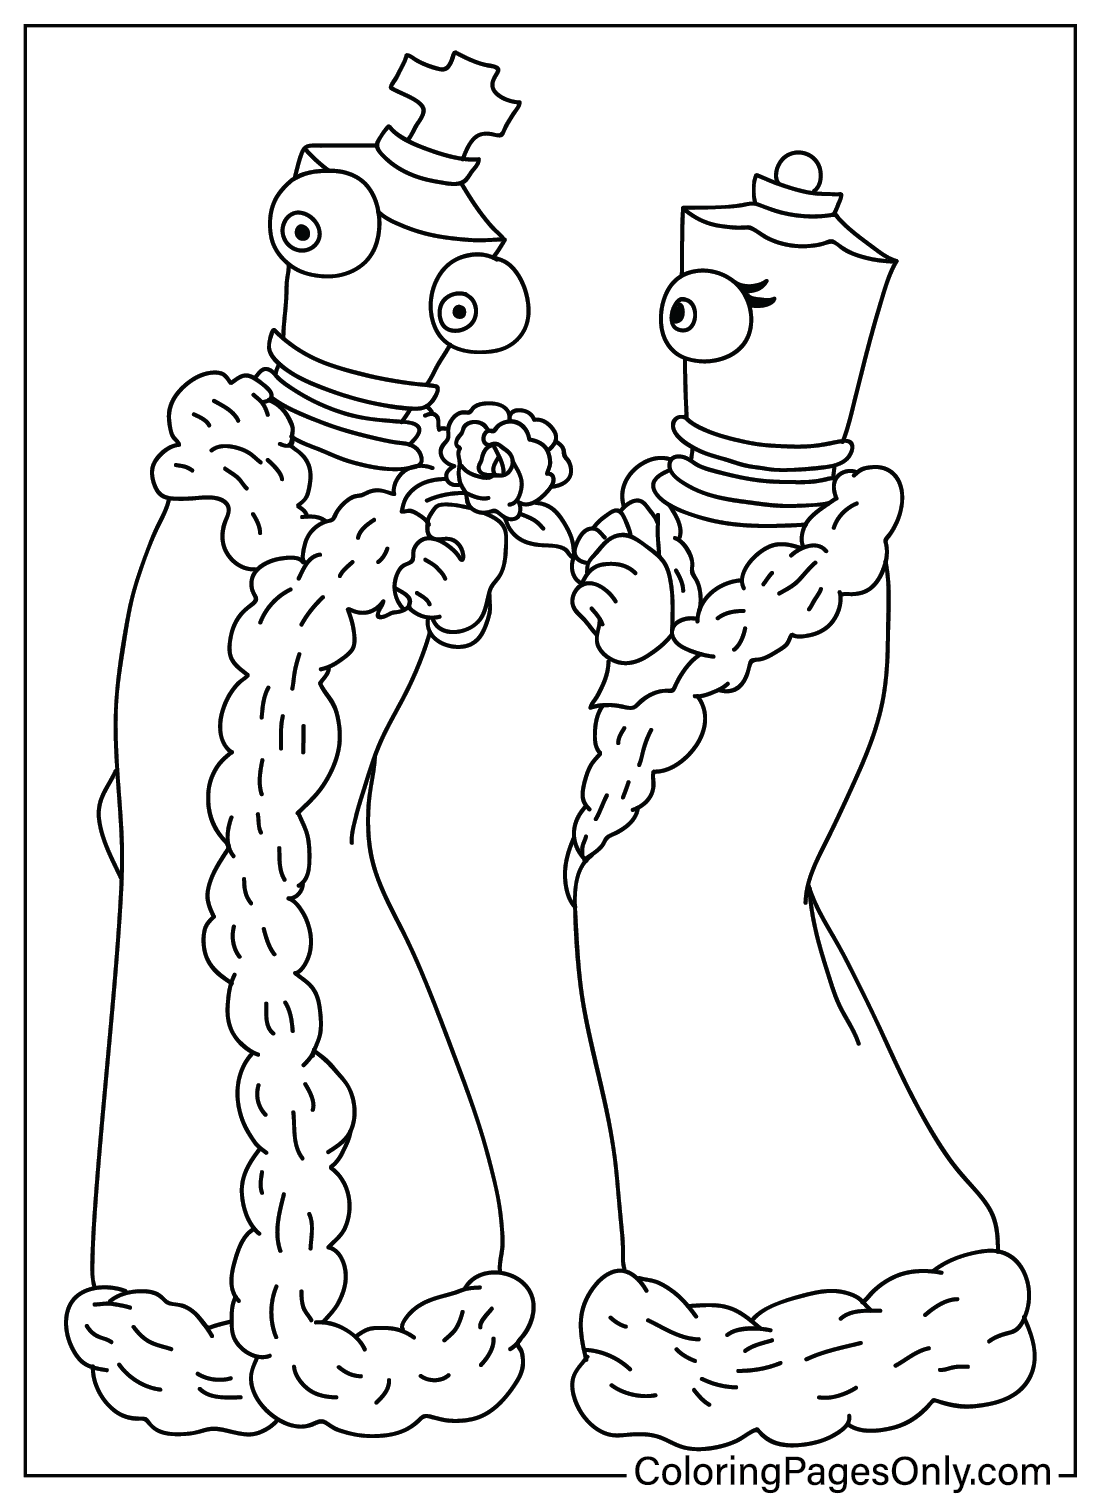 Kinger and Queener Coloring Page from Kinger